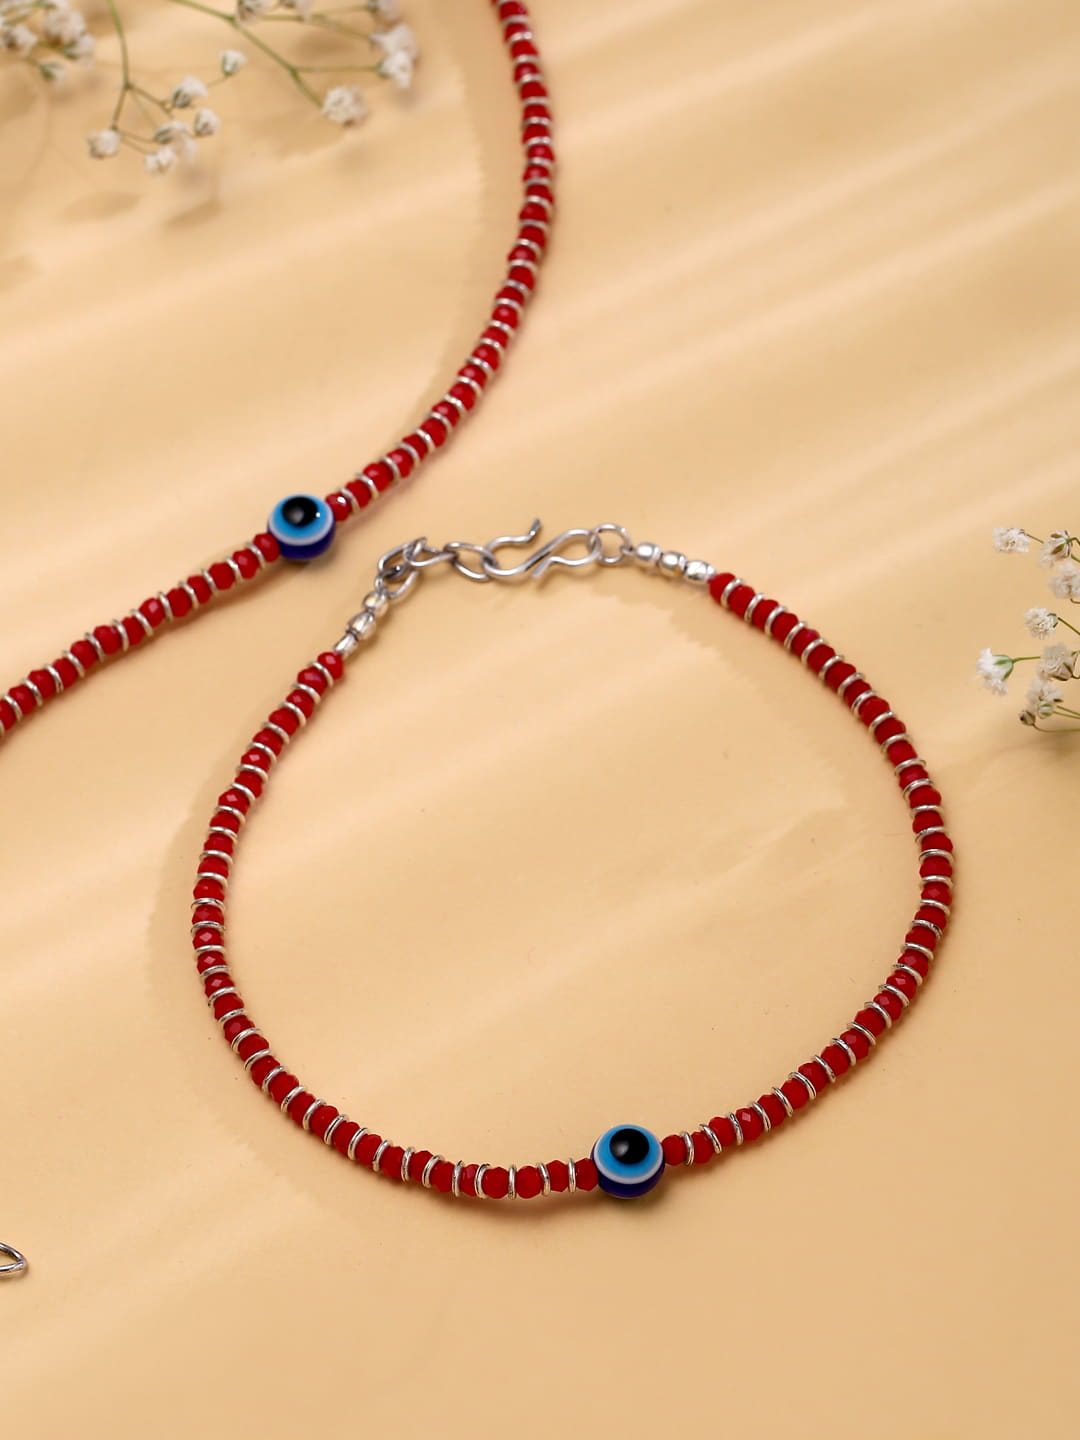 Alphabeys Tribal Style Red Threaded Anklets with Oxidized Ghungroo for  Women and GirlsGlobal Artisans